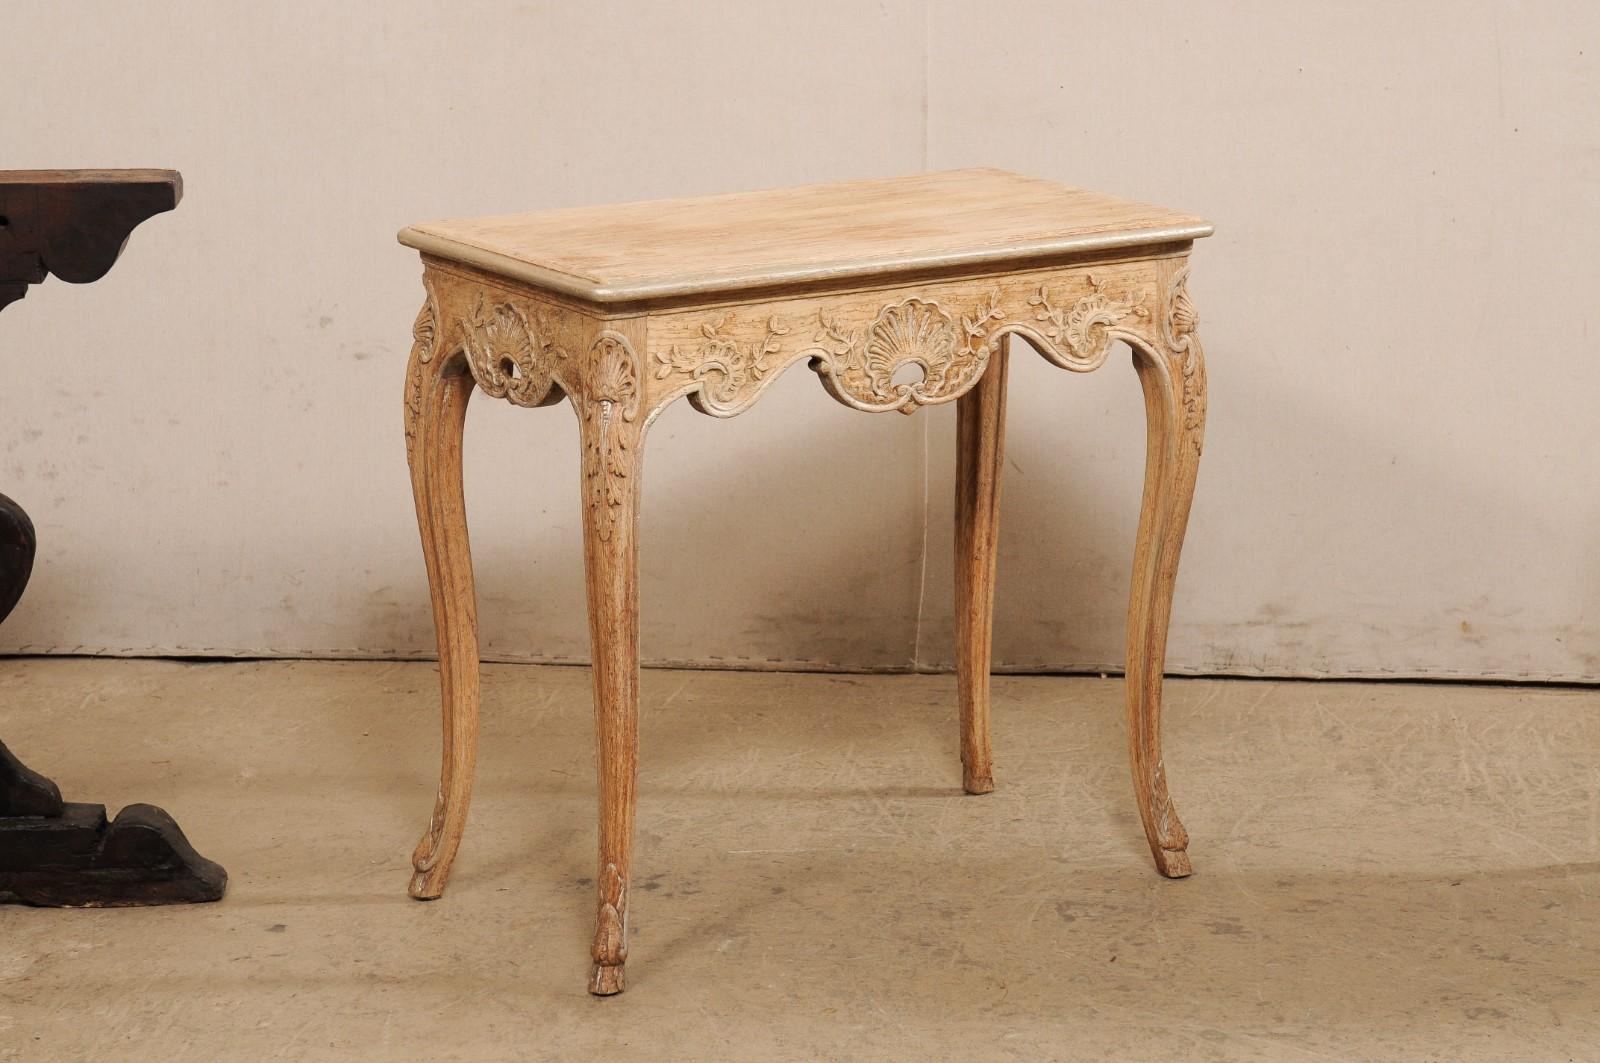 A French pair of smaller-sized carved-wood tables from the early 20th century. These antique tables from France each feature slightly overhanging rectangular-shaped tops with smoothly-rounded corners, over aprons which are elaborately hand carved in